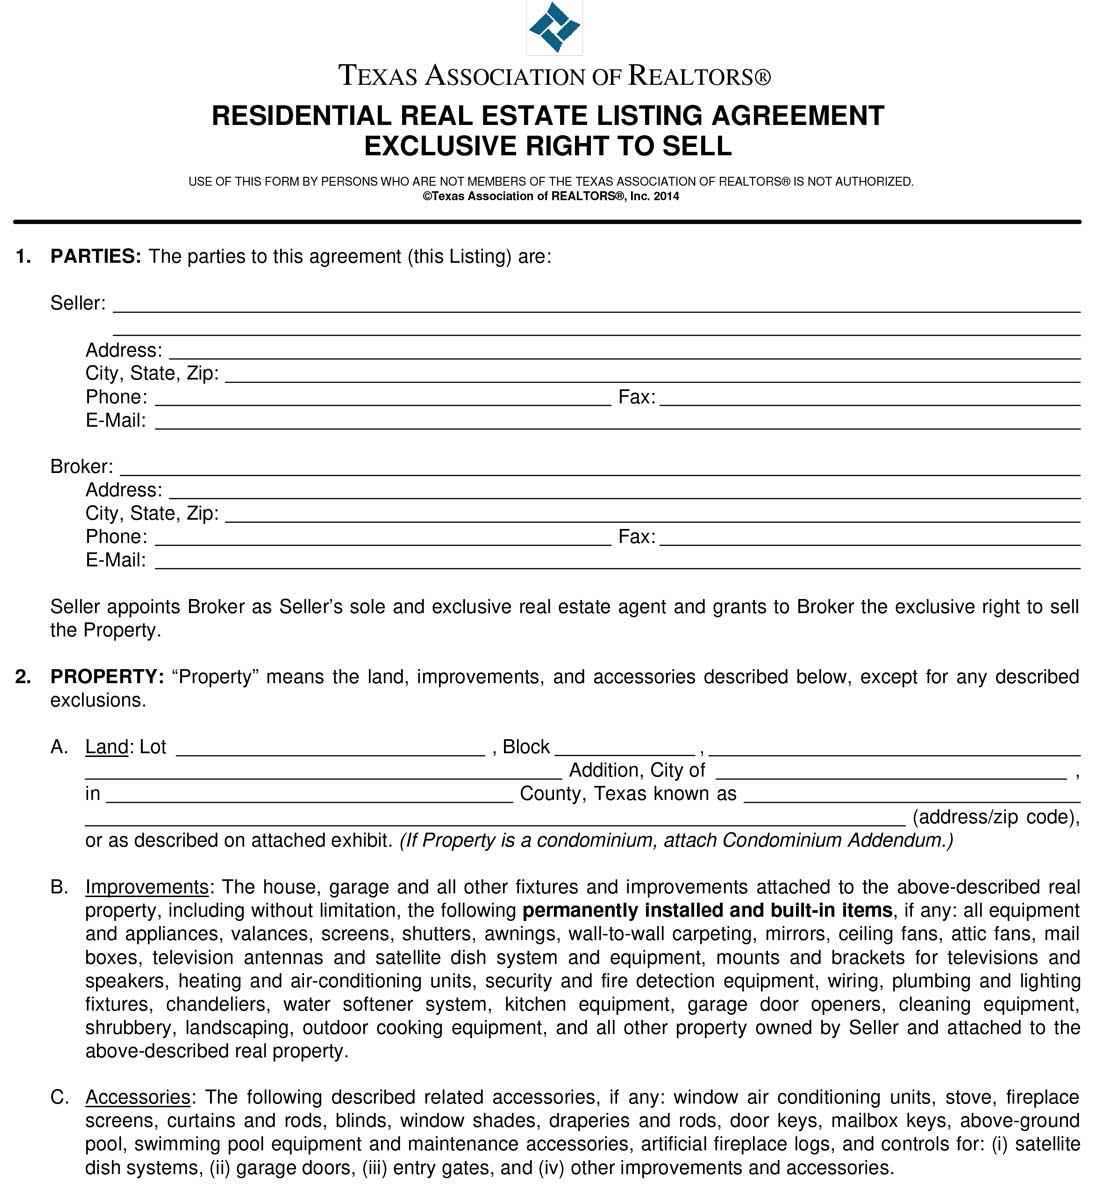 Separate Maintenance Agreement The Listing Agreement Para 1 And 2 Parties And Property